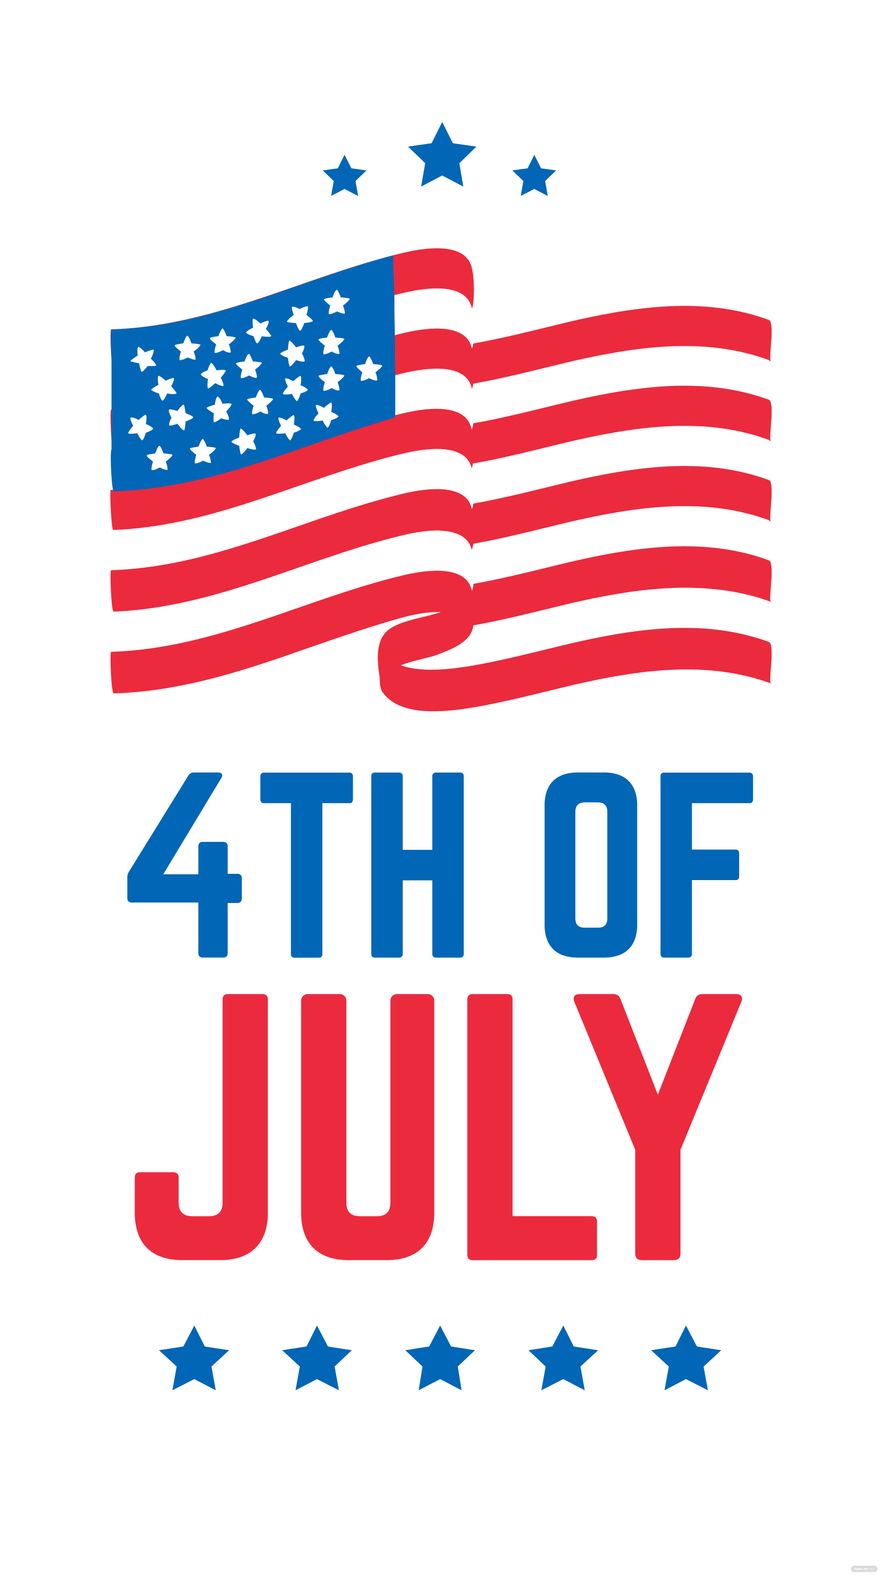 Free 4th Of July Iphone Wallpaper in Illustrator, EPS, SVG, JPG, PNG